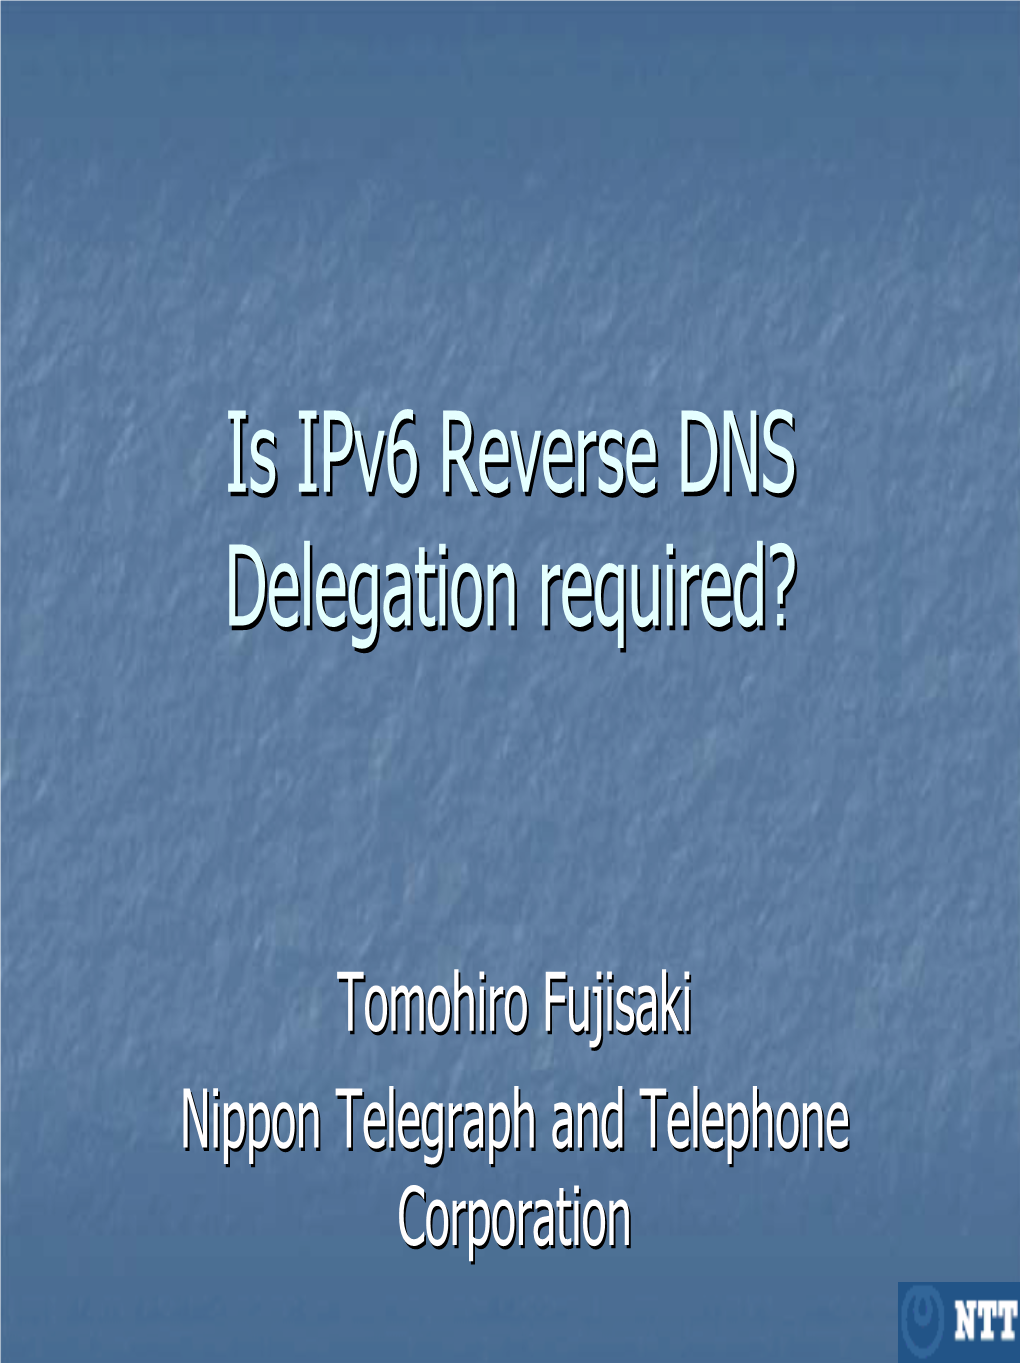 Is Ipv6 Reverse DNS Delegation Required?